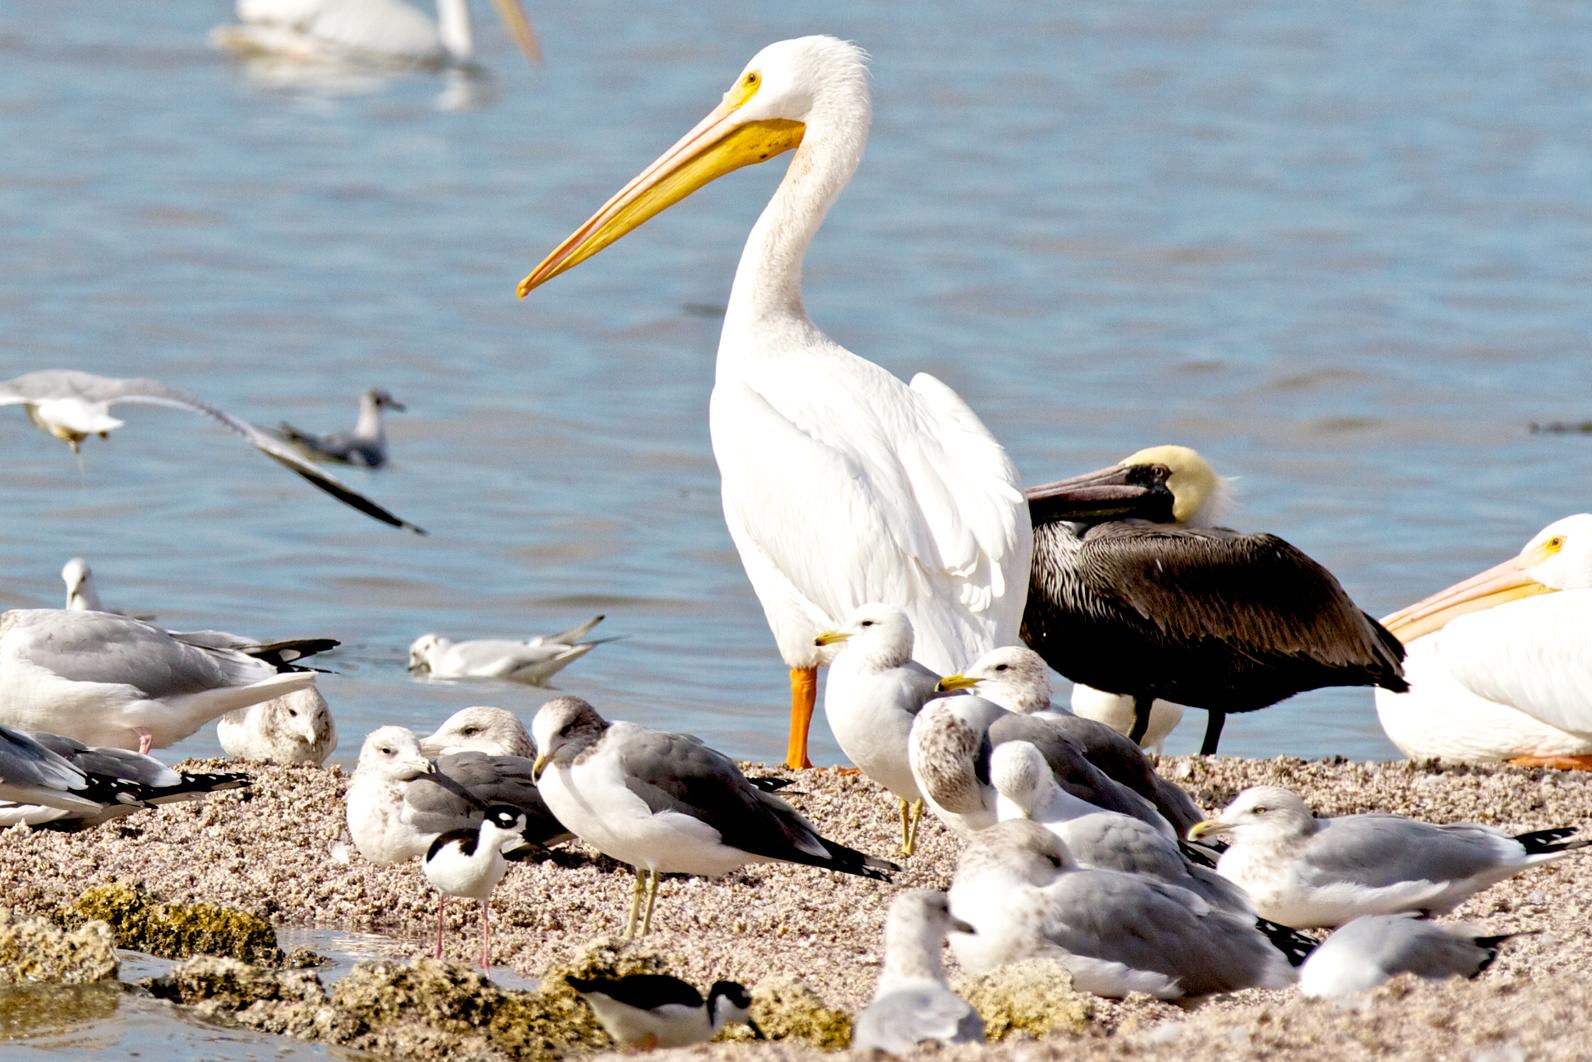 Salton Sea at the center of new Western water conflict? Audubon